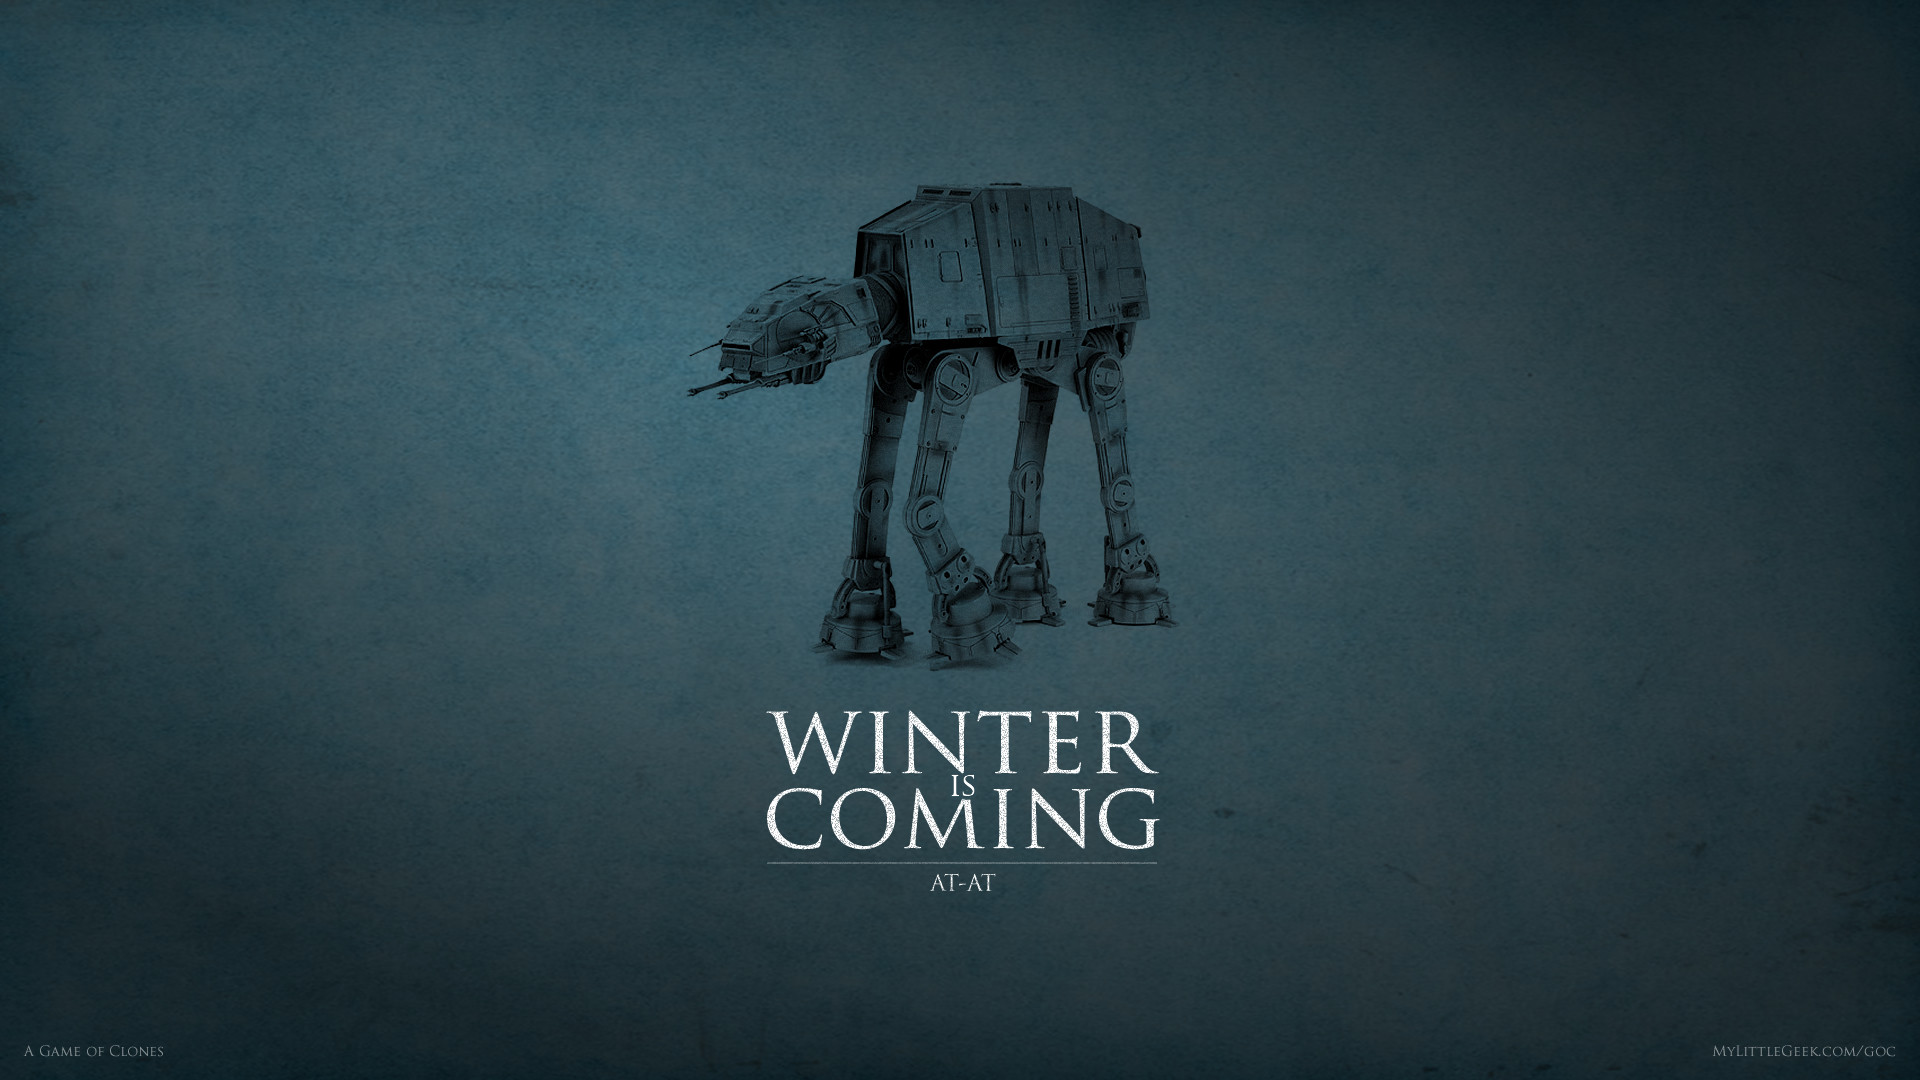 Winter Is Ing At